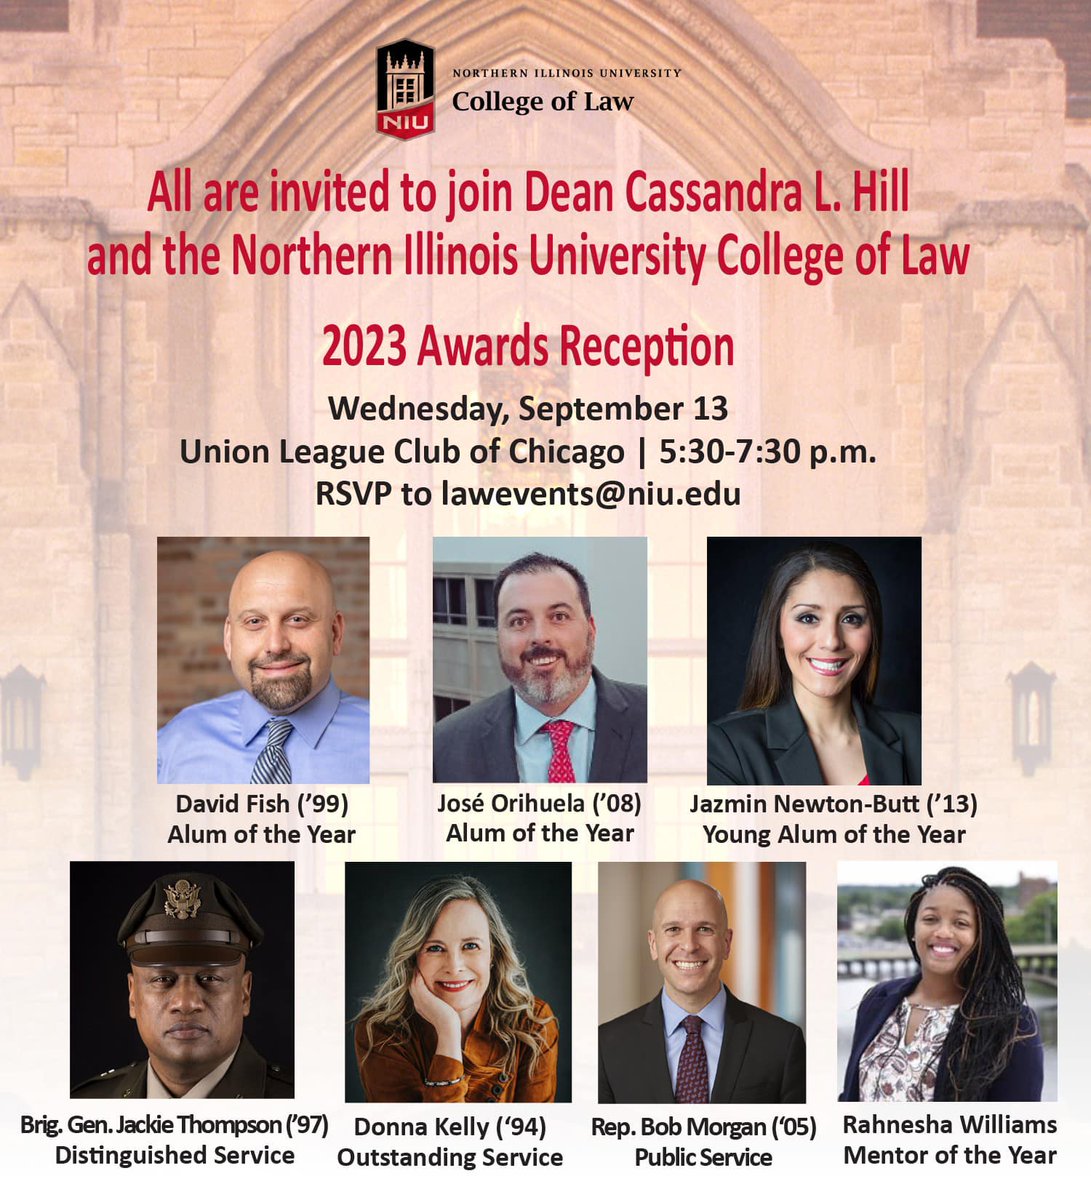 Mark your calendars for Sept 13. at 5:30 p.m. we invite you to join us at the Union League Club of Chicago to honor the distinguished recipients of the 2023 NIU Law Award. RSVP to lawevents@niu.edu by Sept 13. #niulaw #niulawhasitall #NIULawIs4You #niulawproud